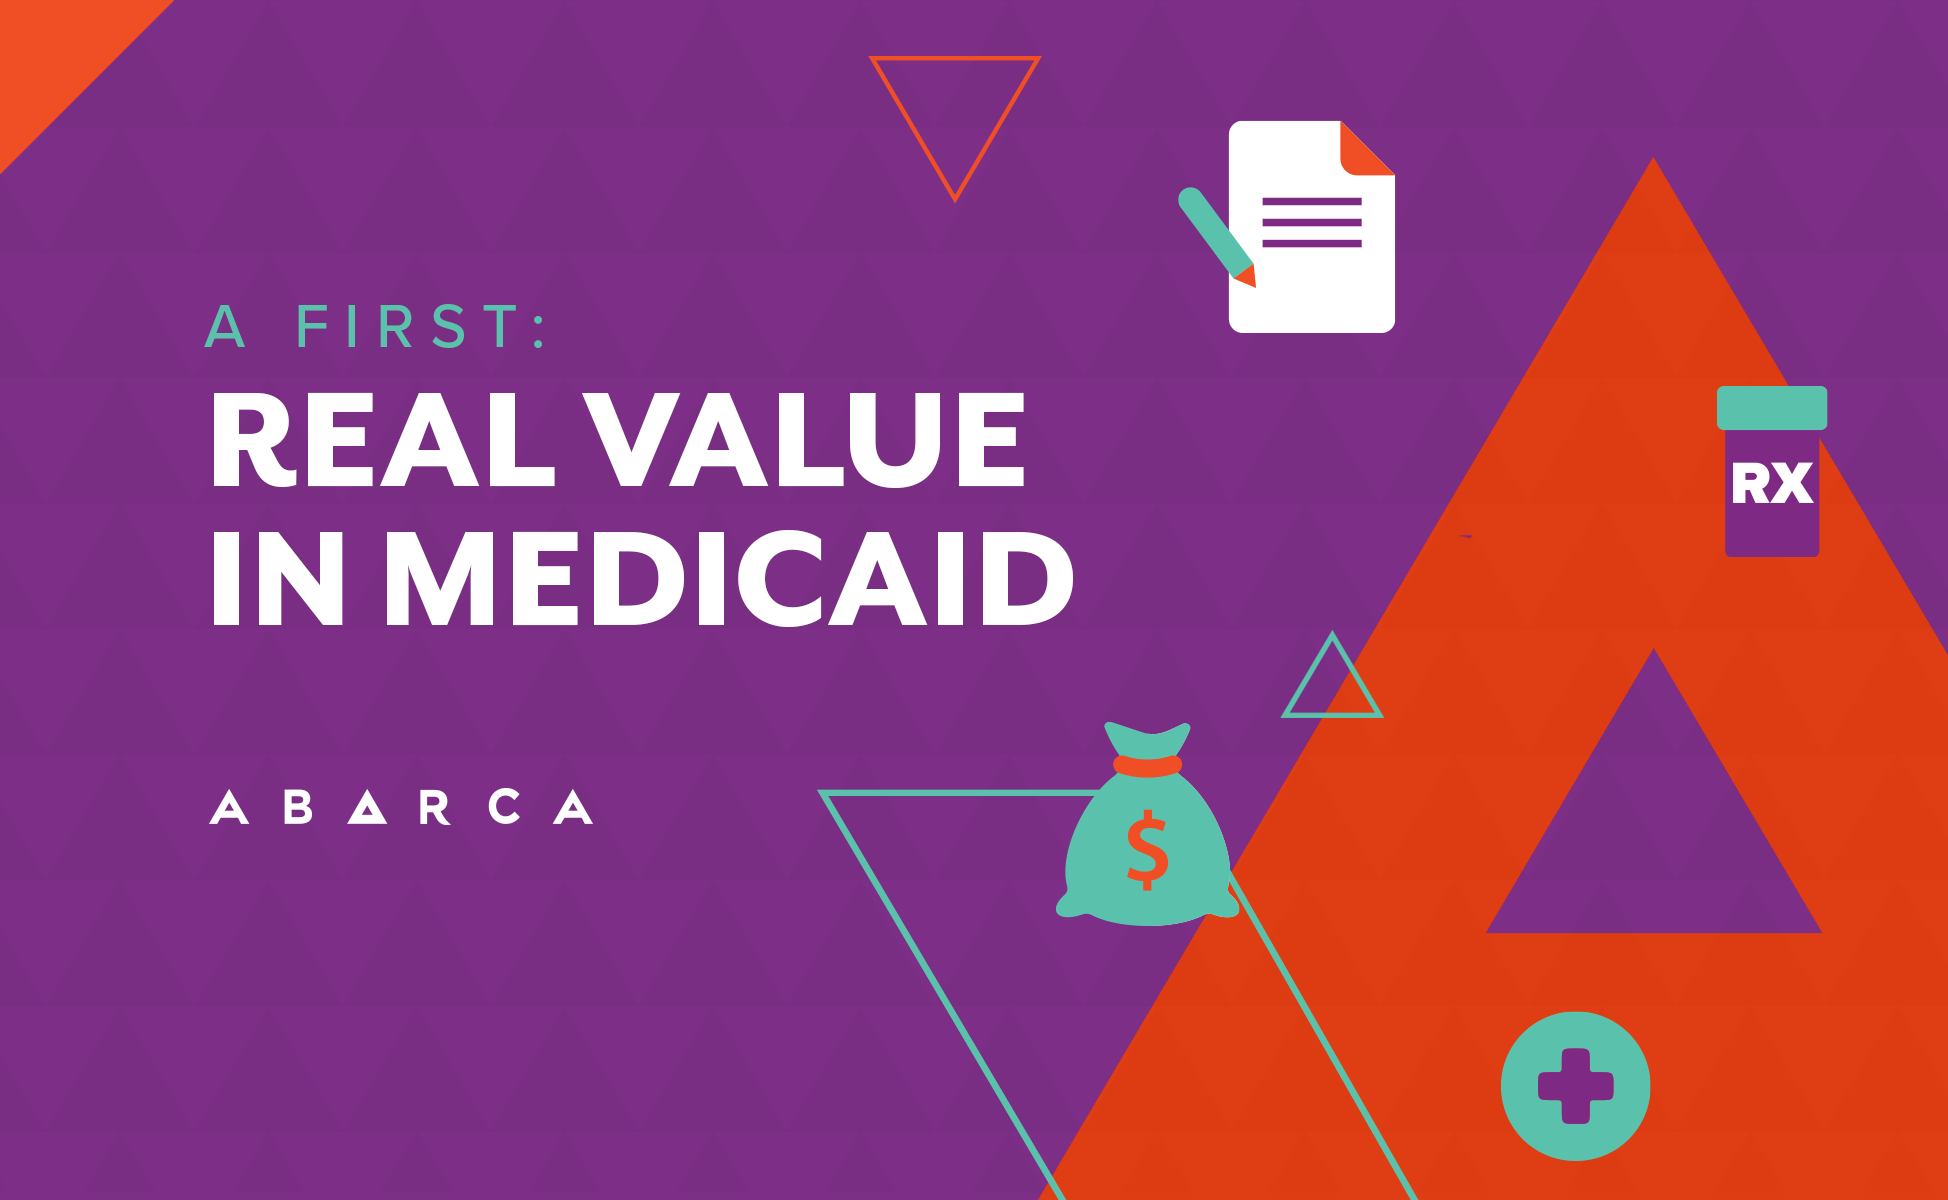 Abarca delivers real value in Medicaid